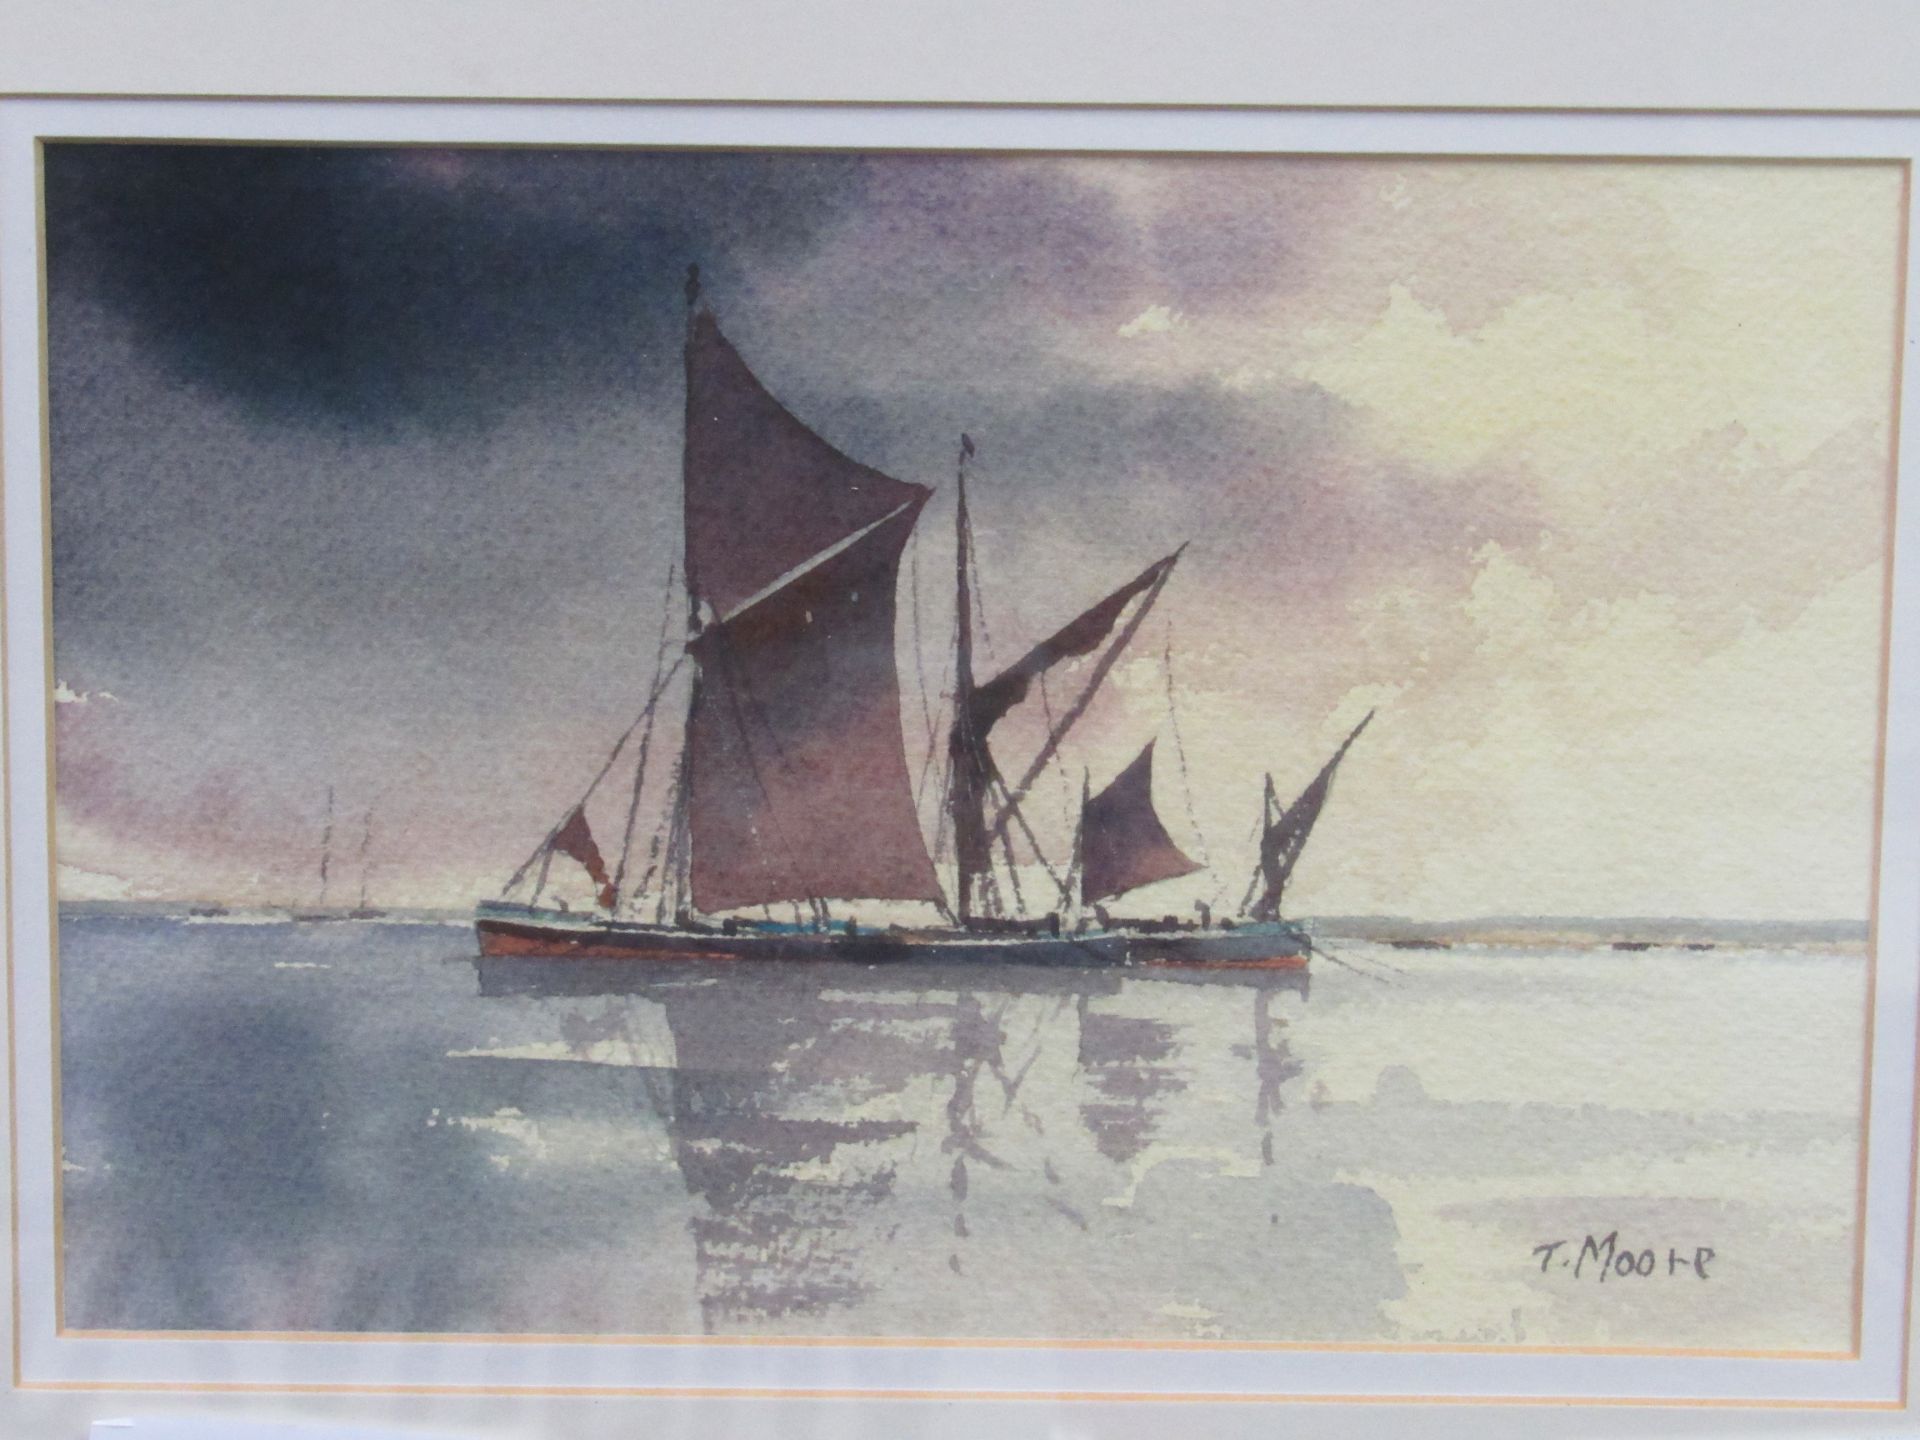 Framed and glazed original watercolour of Thames Barge signed Thomas Moore. Estimate £30-40.